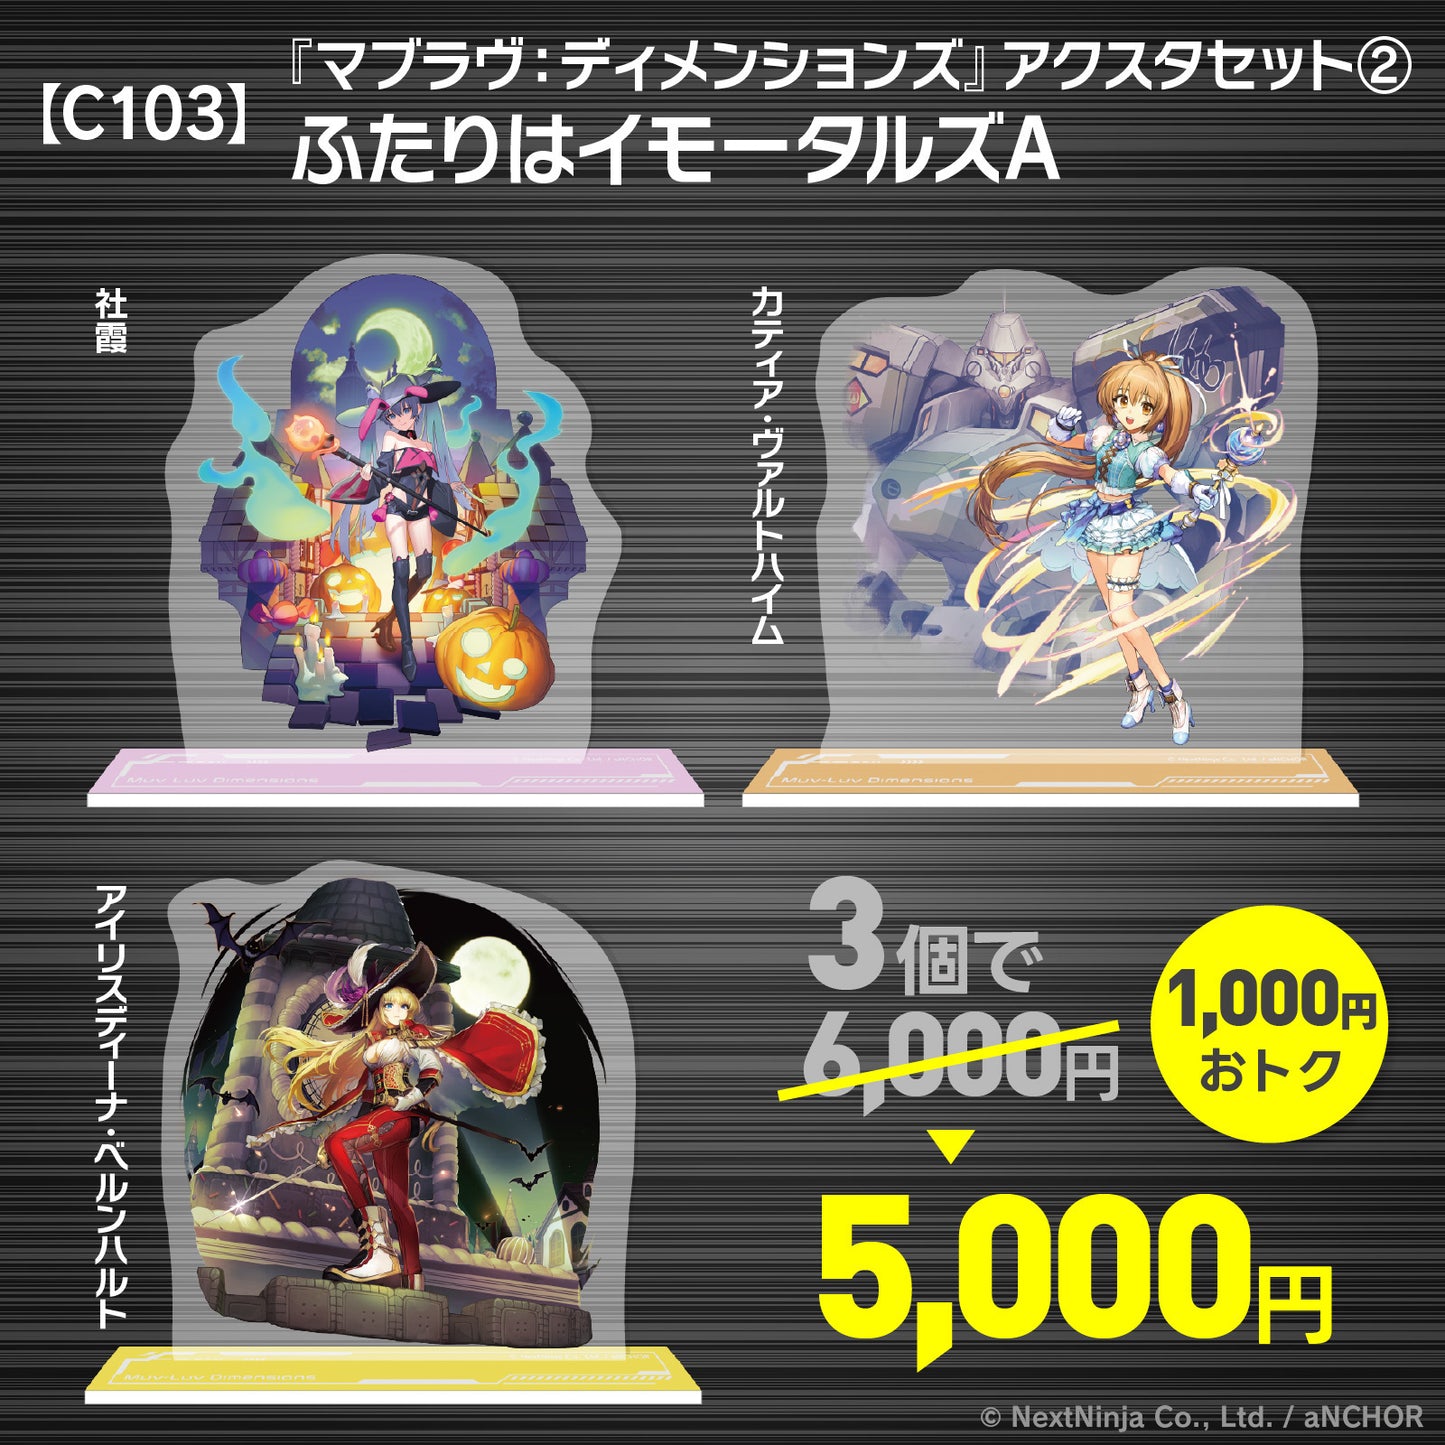 【C103】Muv-Luv Dimensions Acrylic Stand Set②・October Event Set A